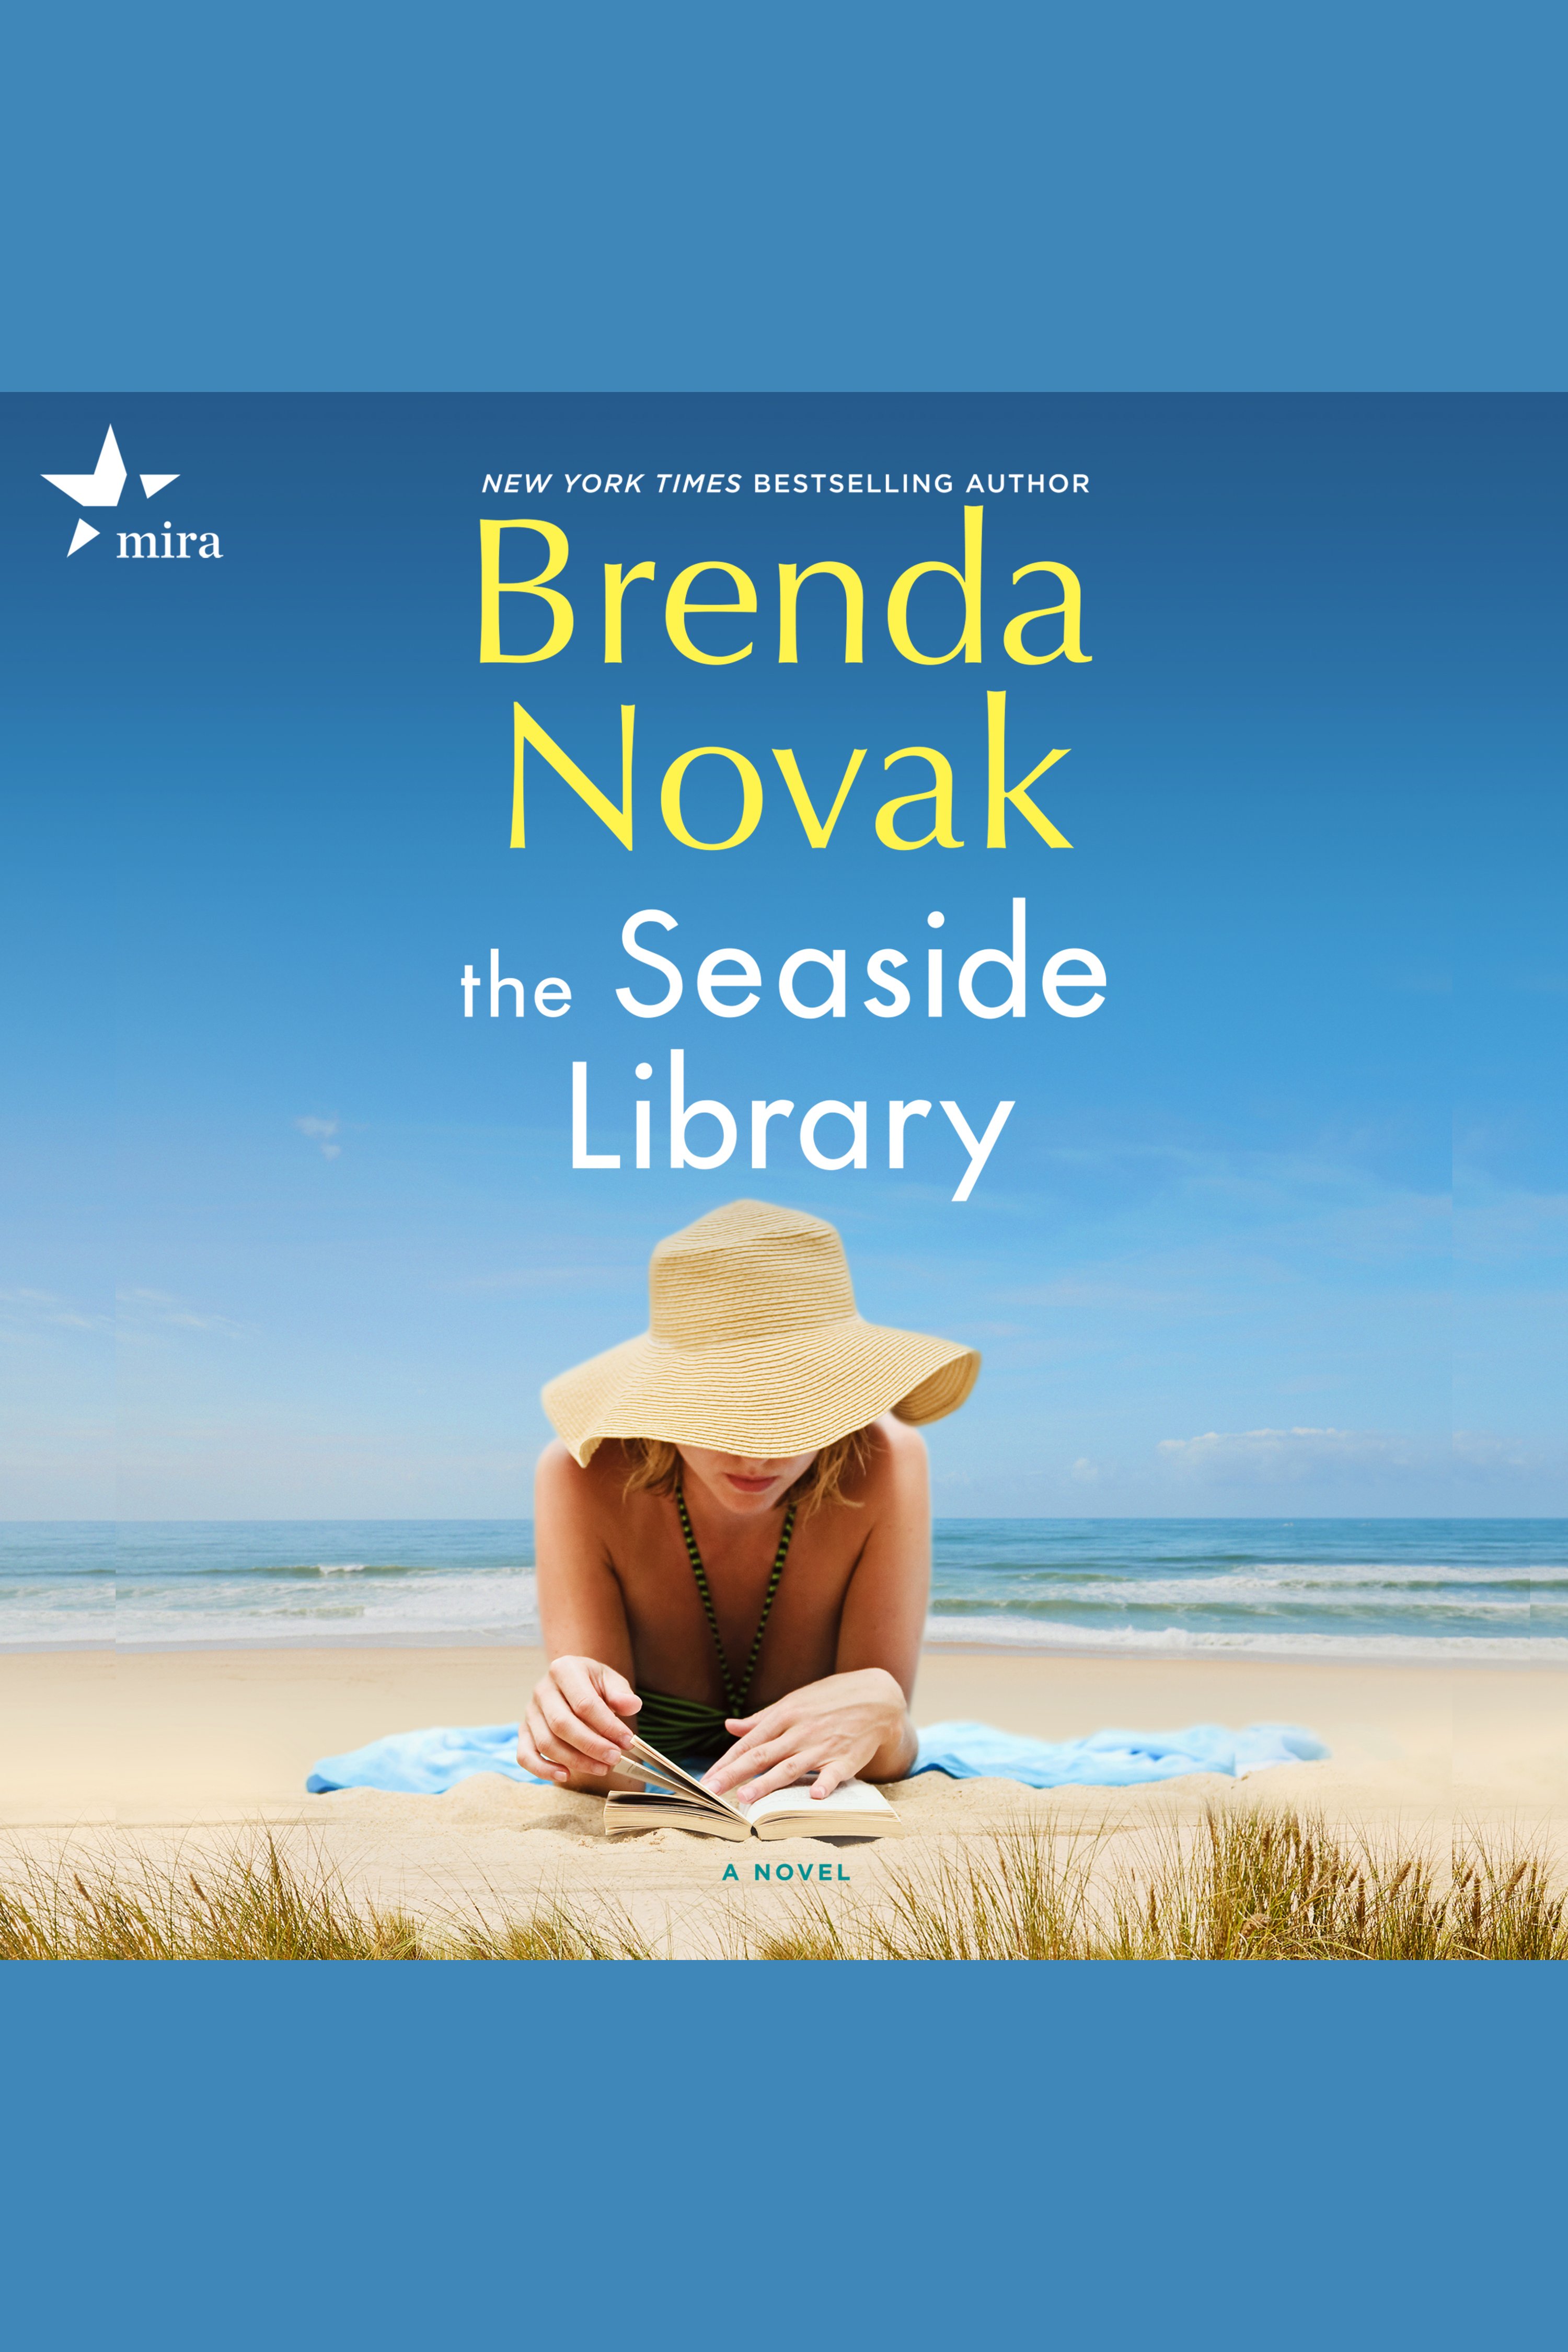 The Seaside Library cover image